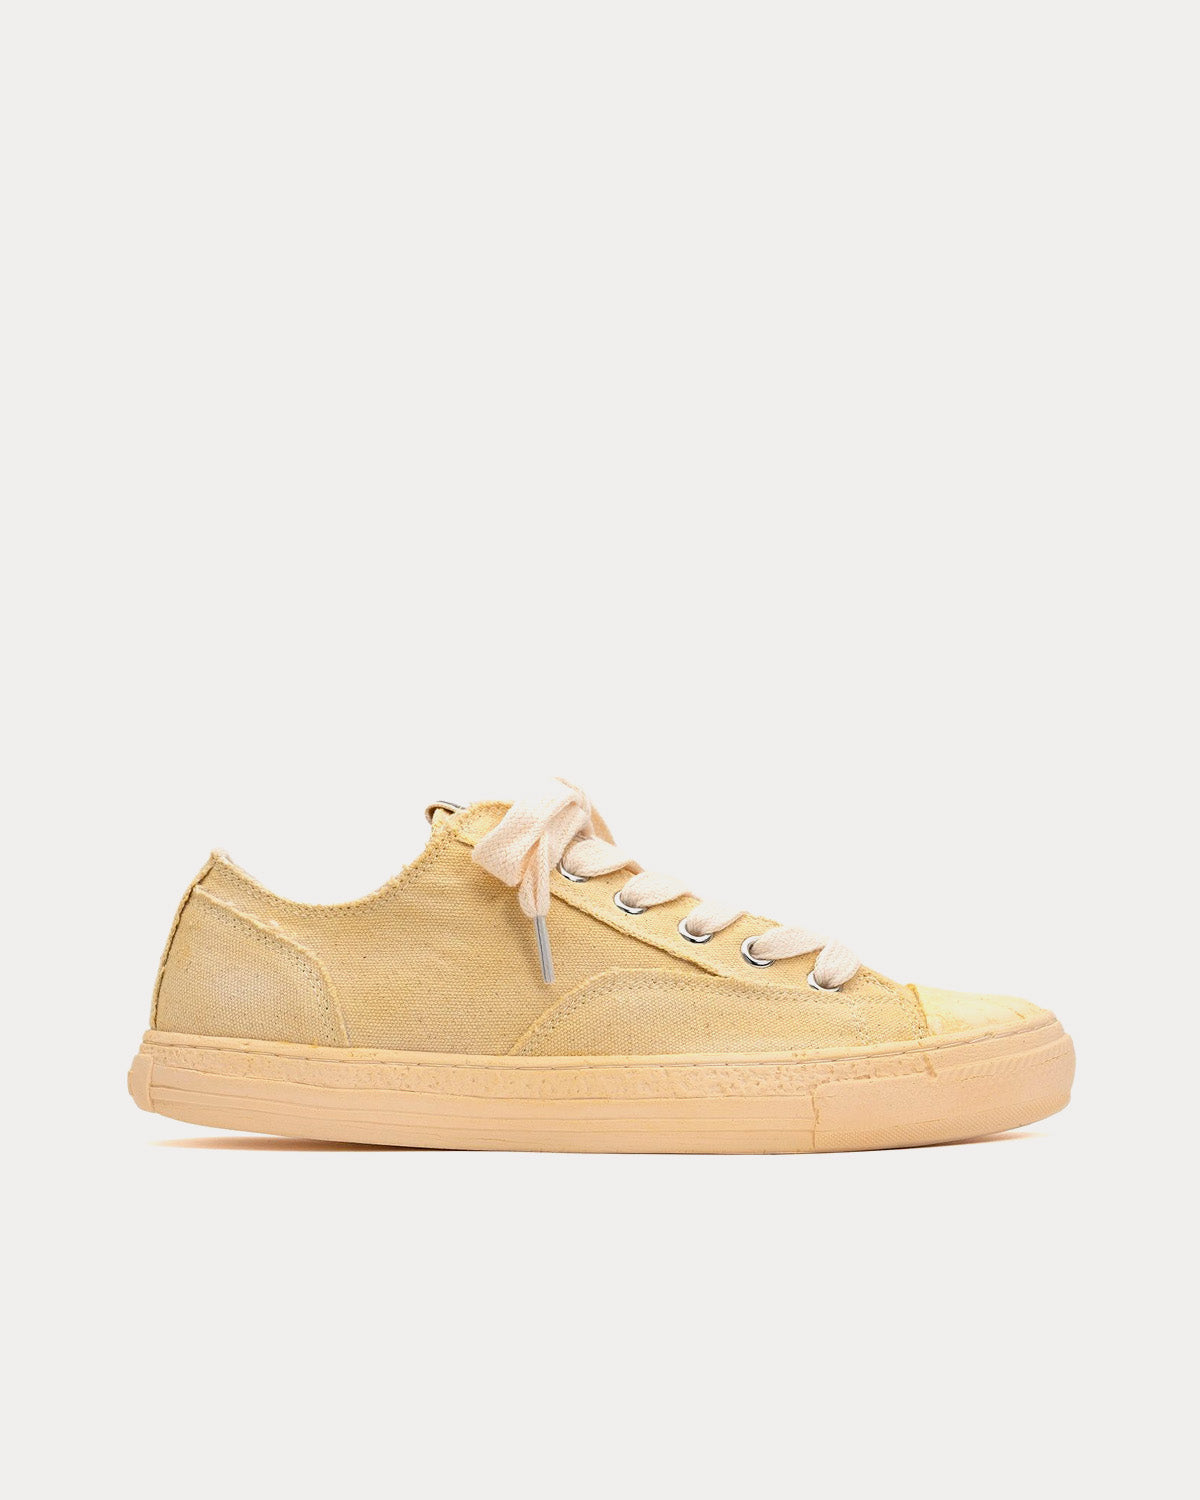 General Scale By Maison Mihara Yasuhiro - Past Sole Overdyed Canvas Beige Low Top Sneakers